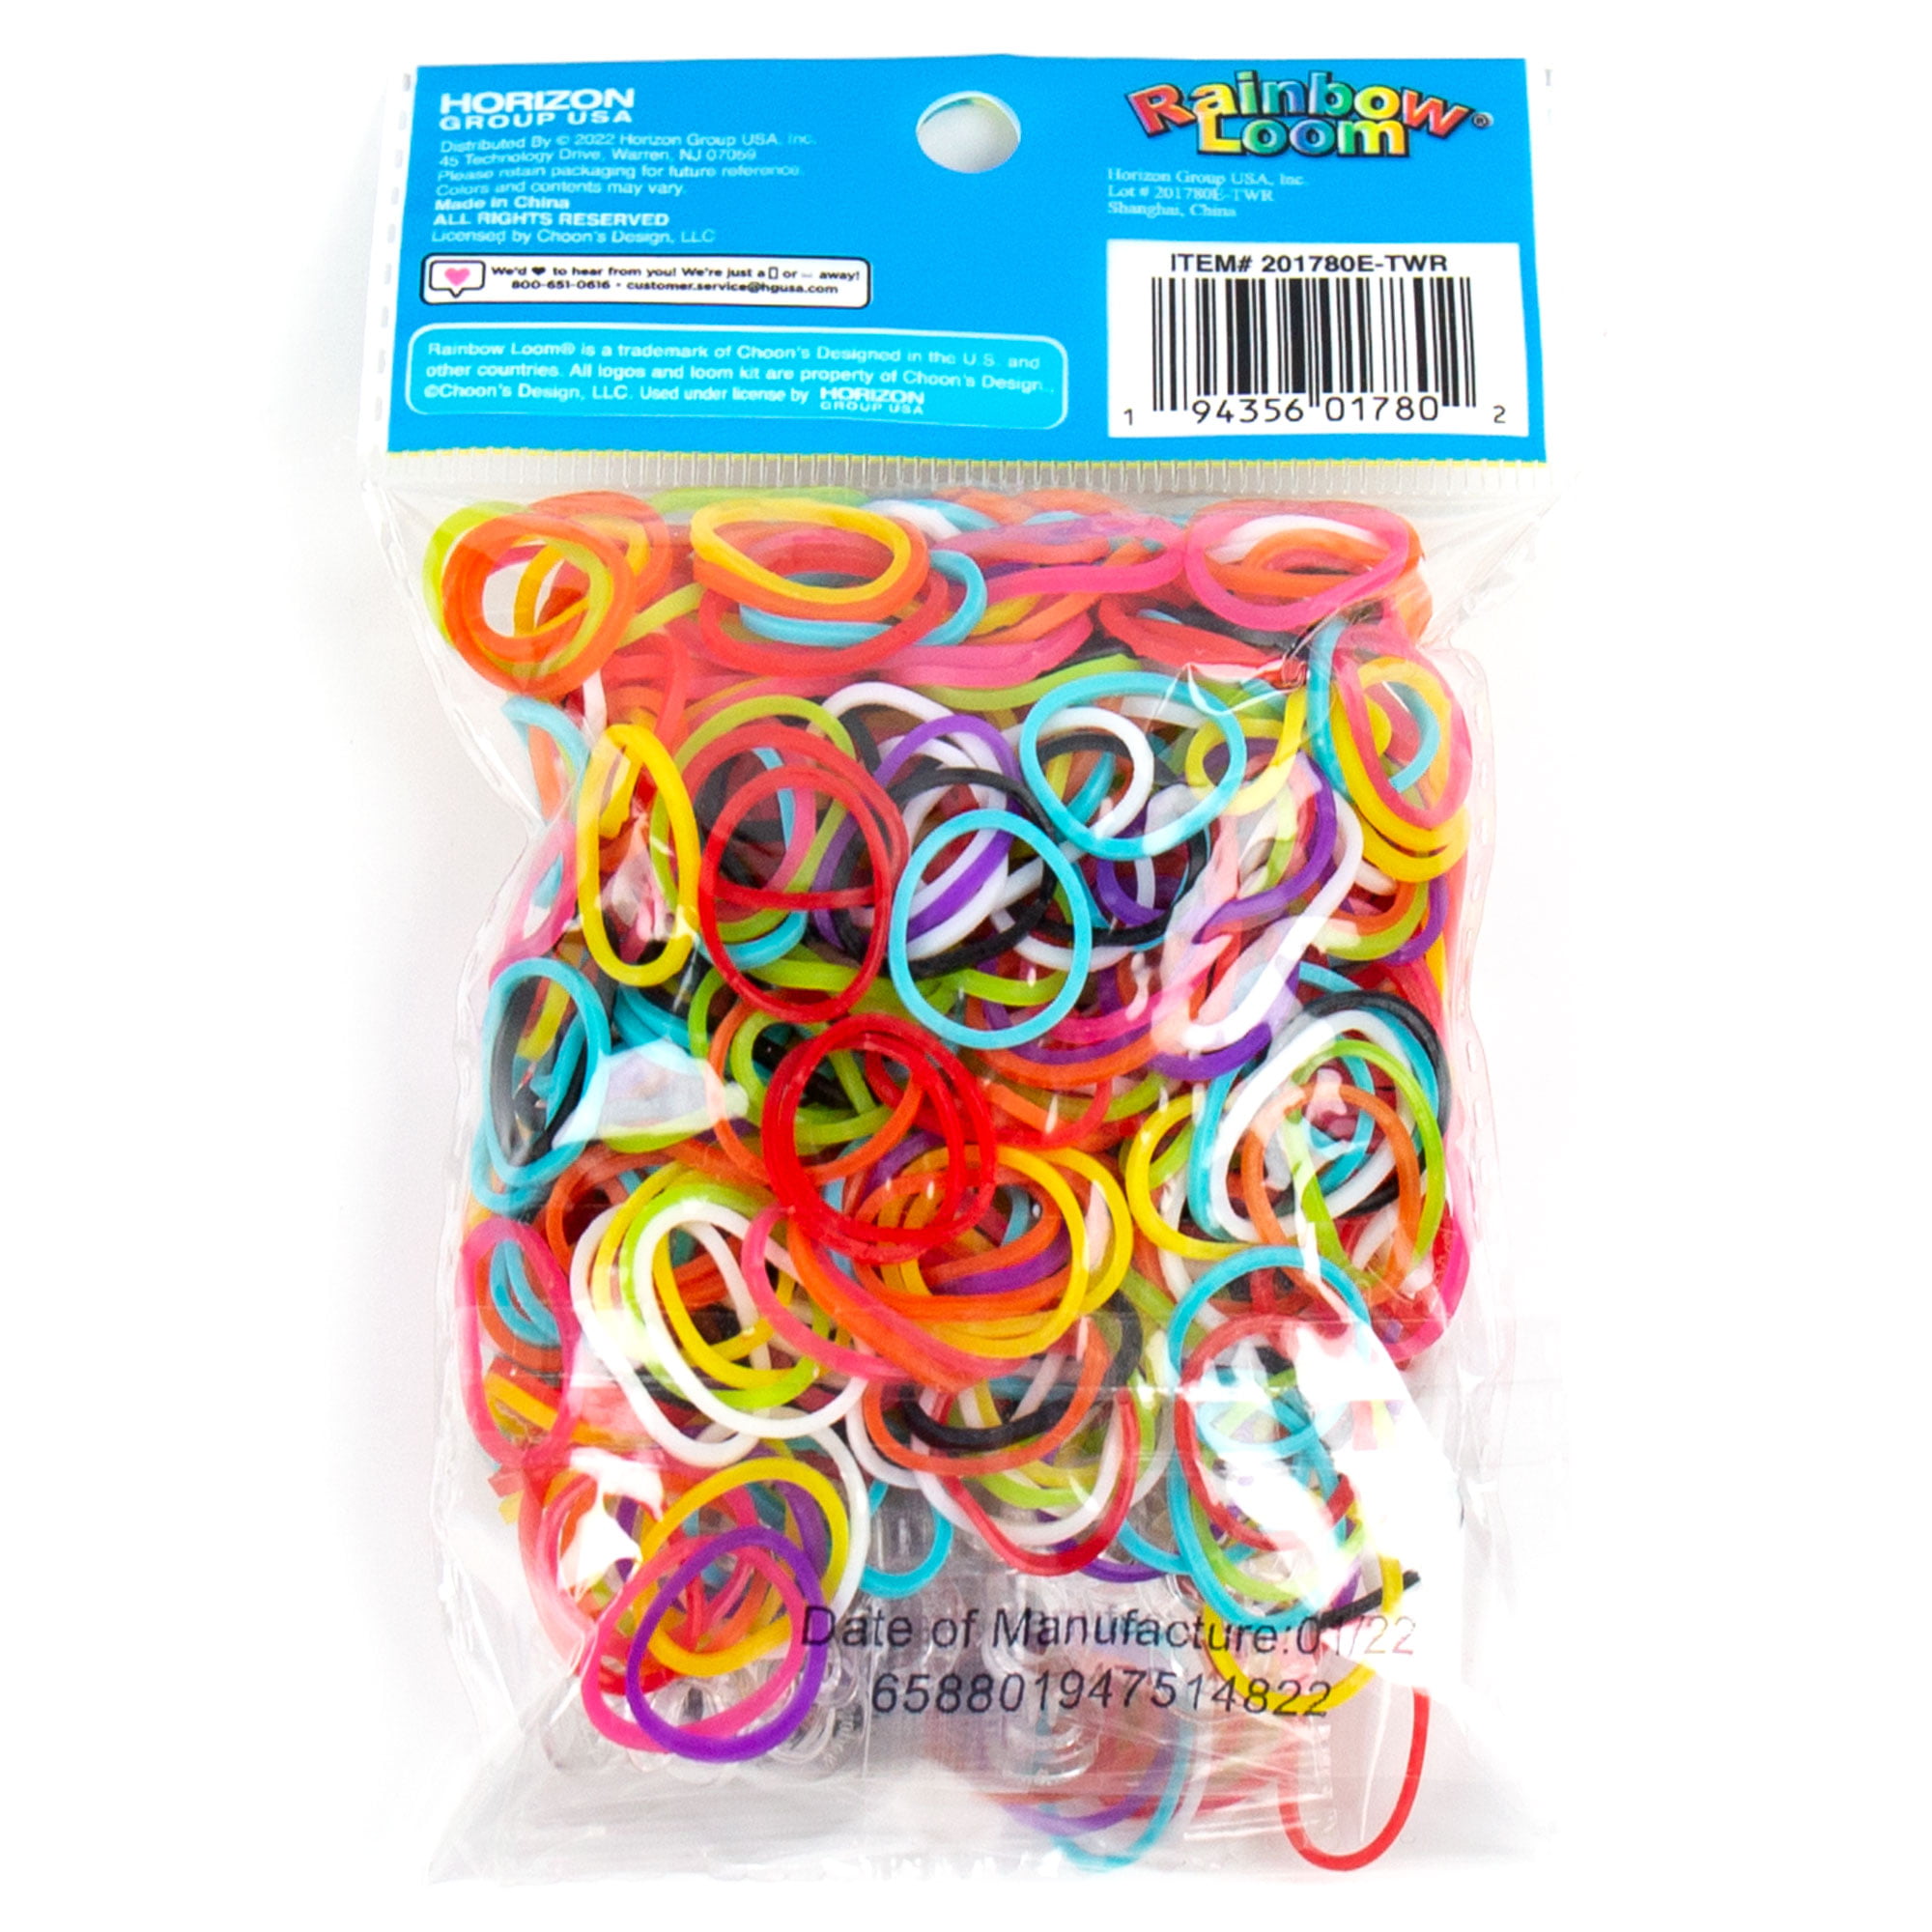 12 Pack: Rainbow Loom® Pastel Rubber Bands